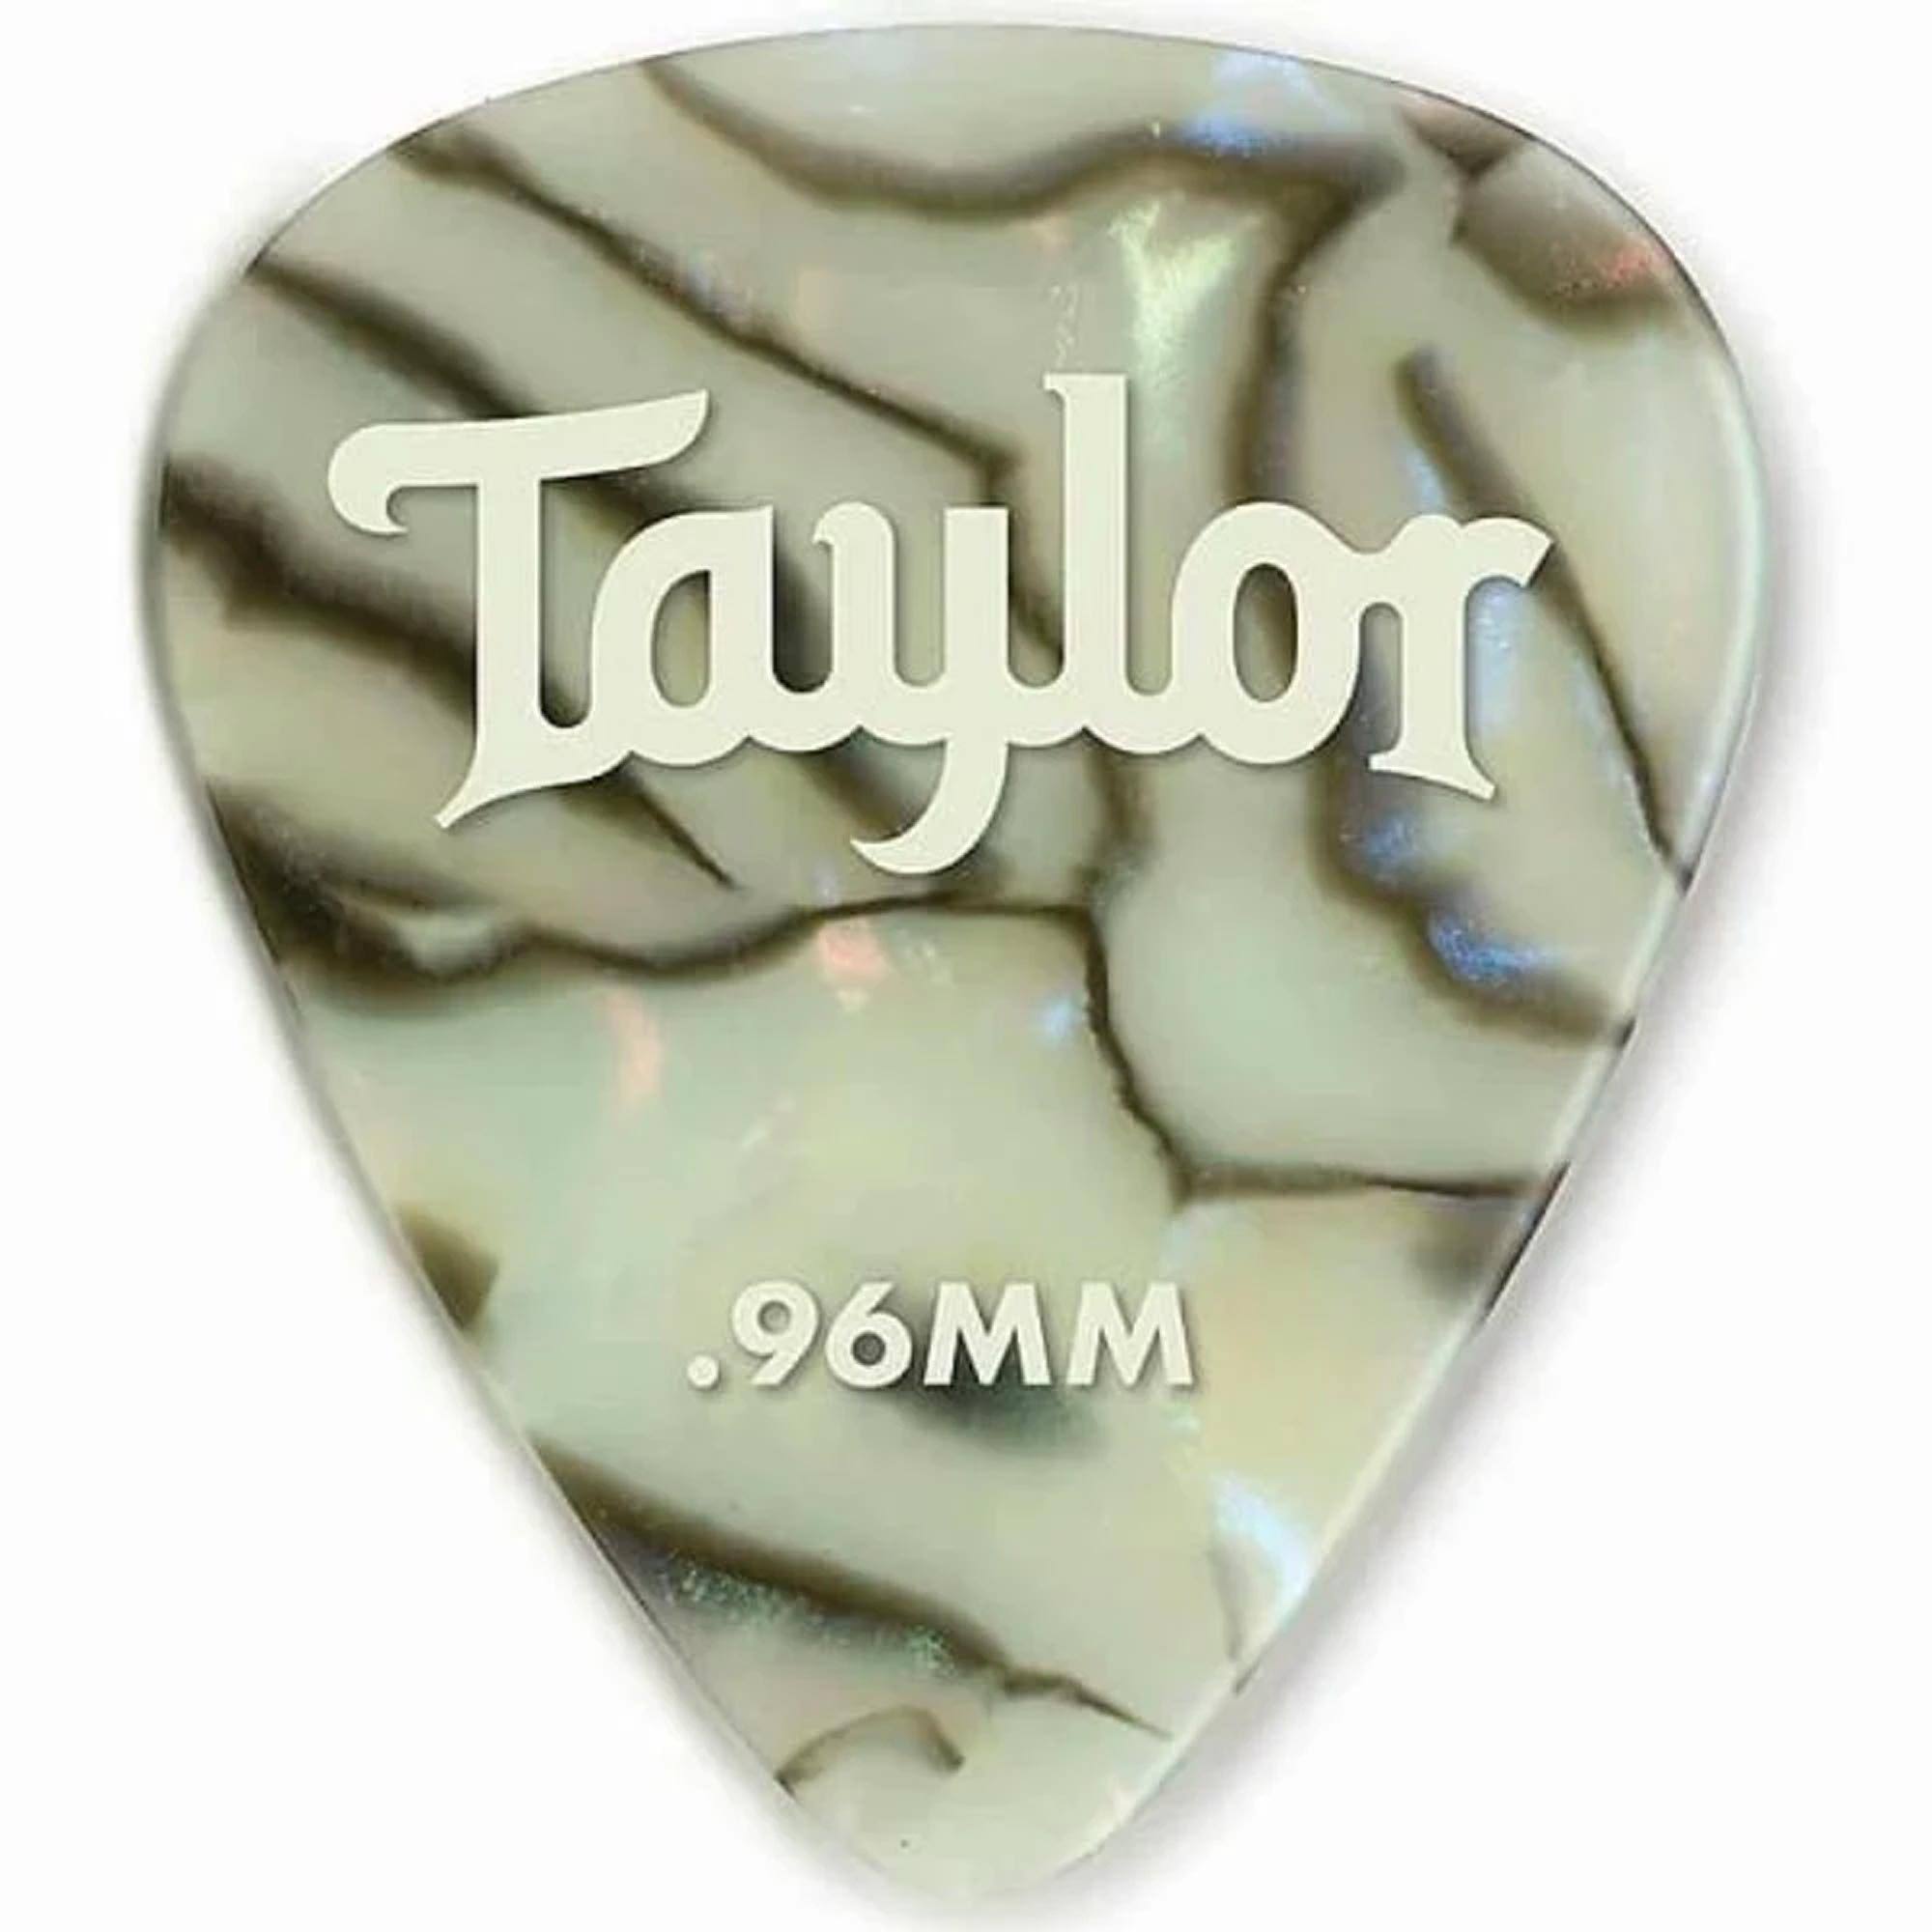 Taylor Celluloid 351 Guitar Pick - Abalone, .96mm, 12pk